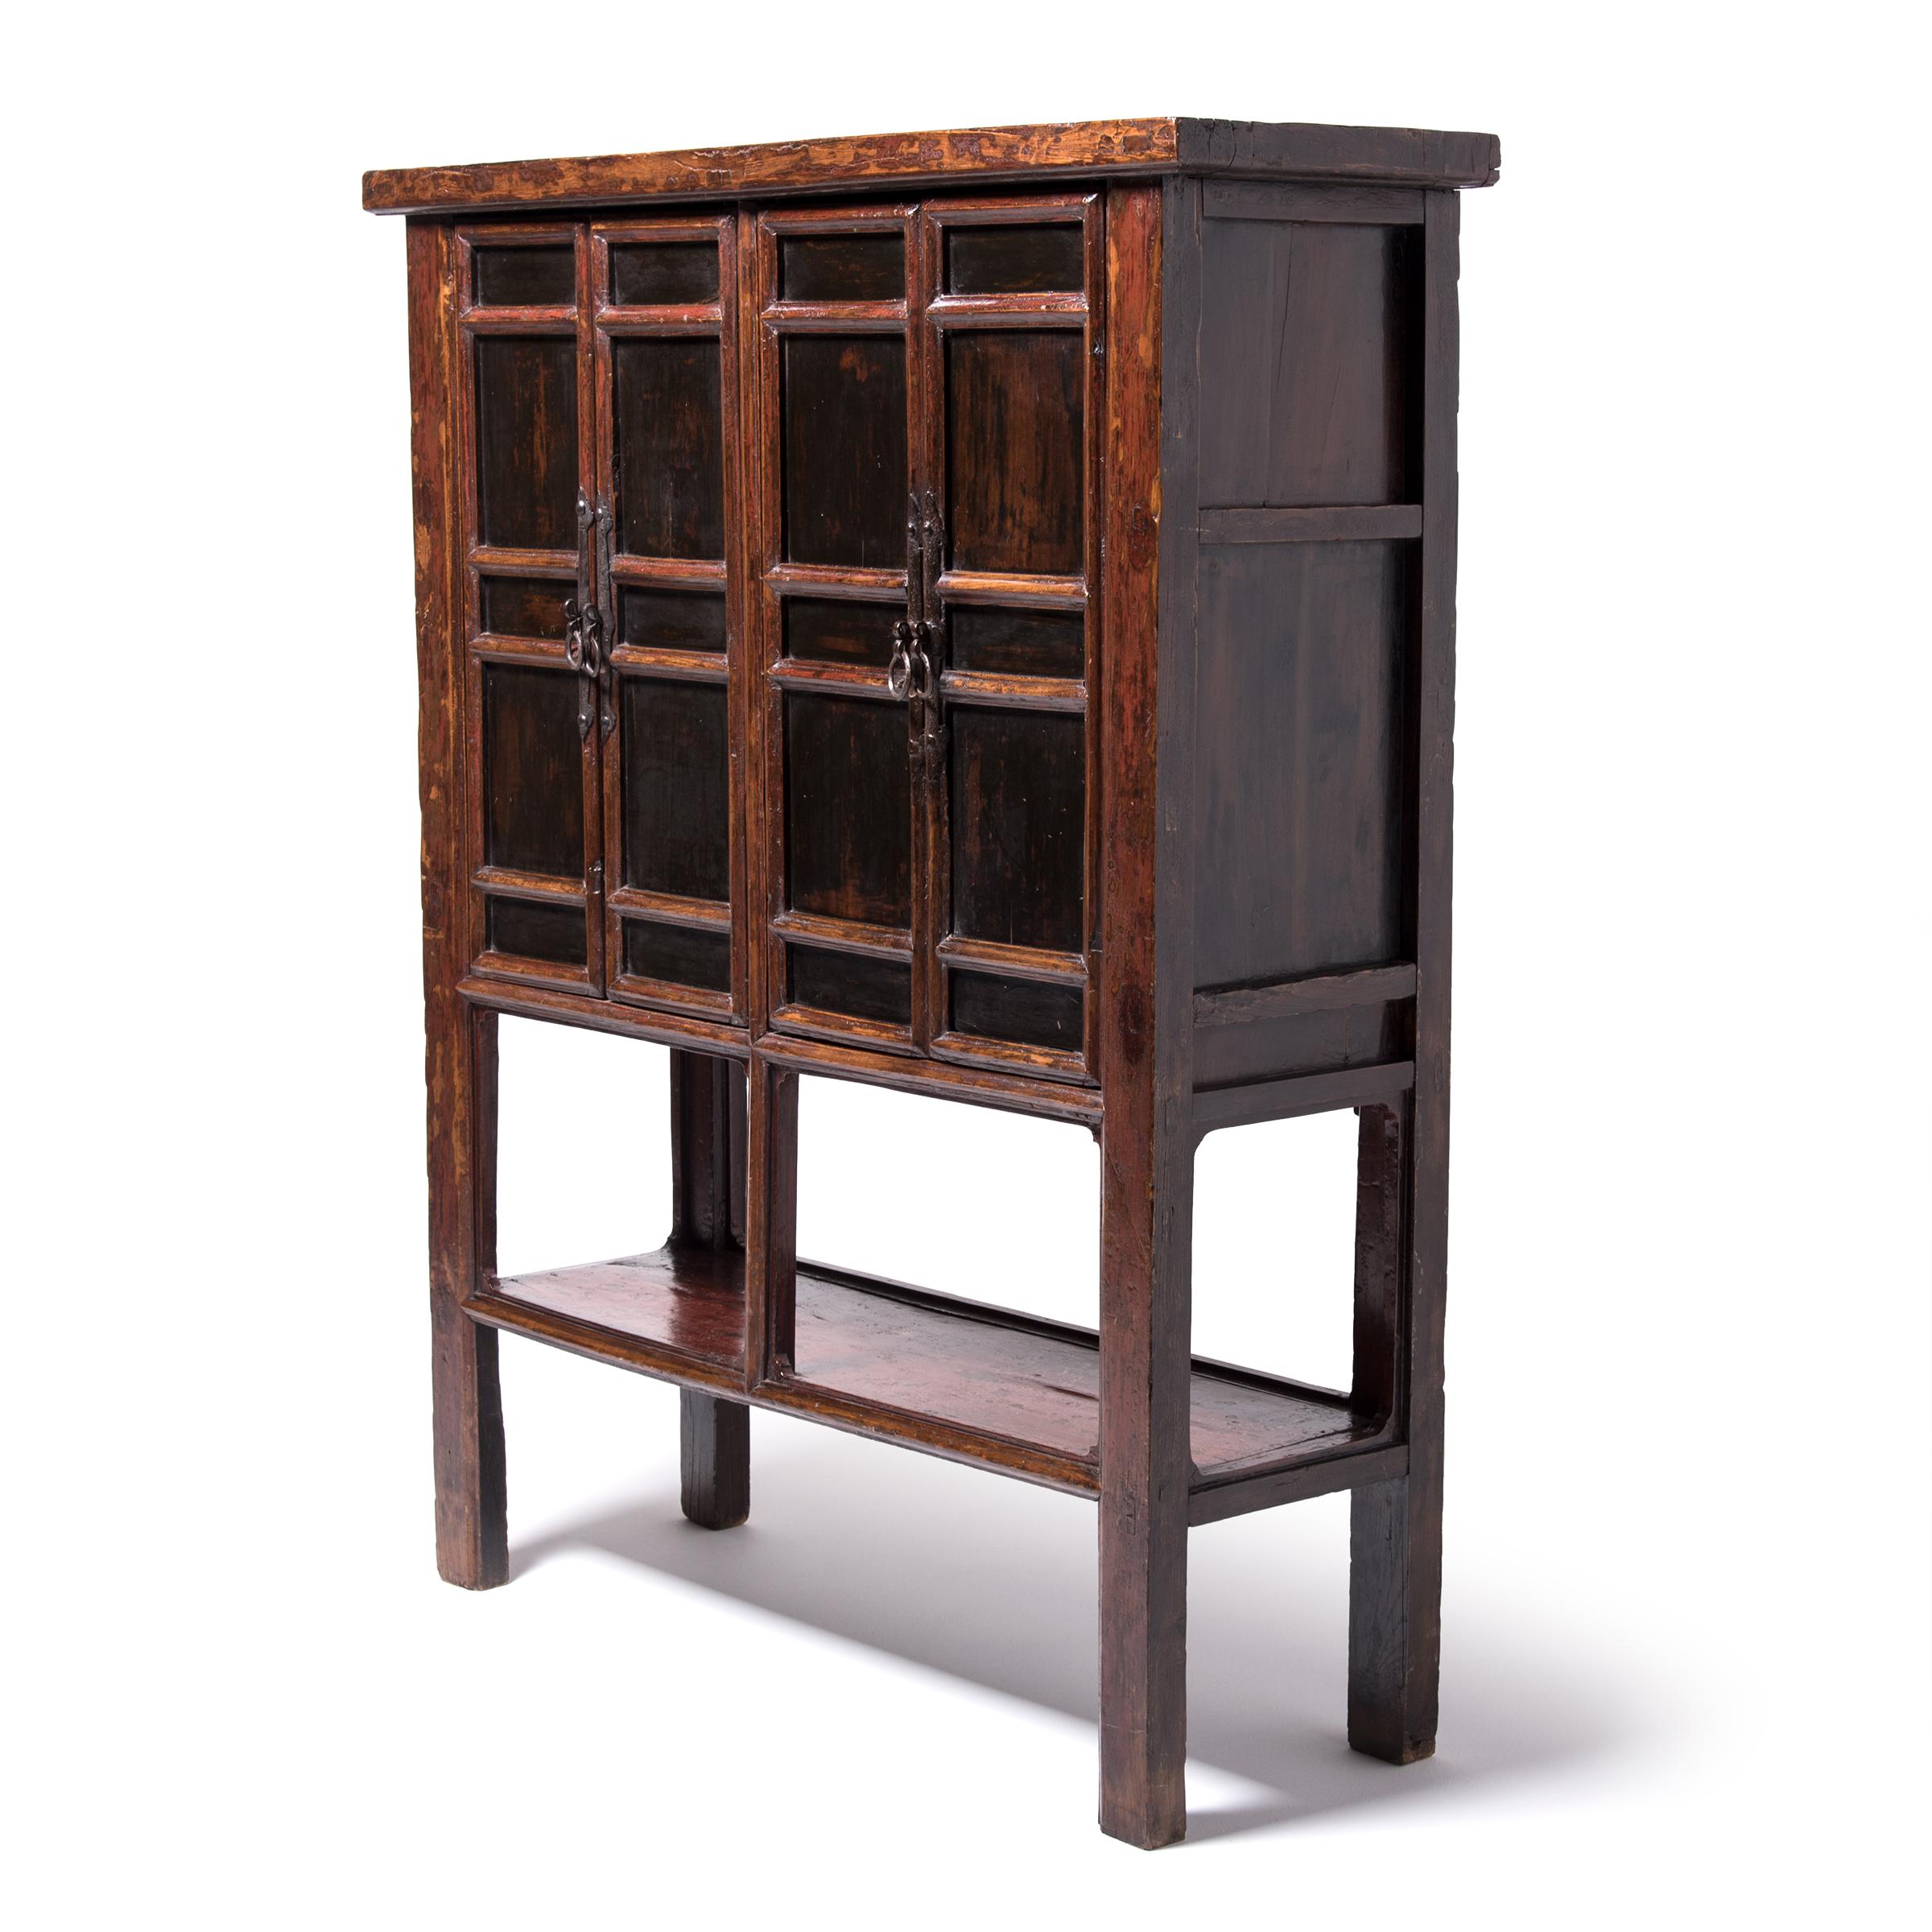 Qing Provincial Chinese Cabinet with Open Shelf, c. 1850